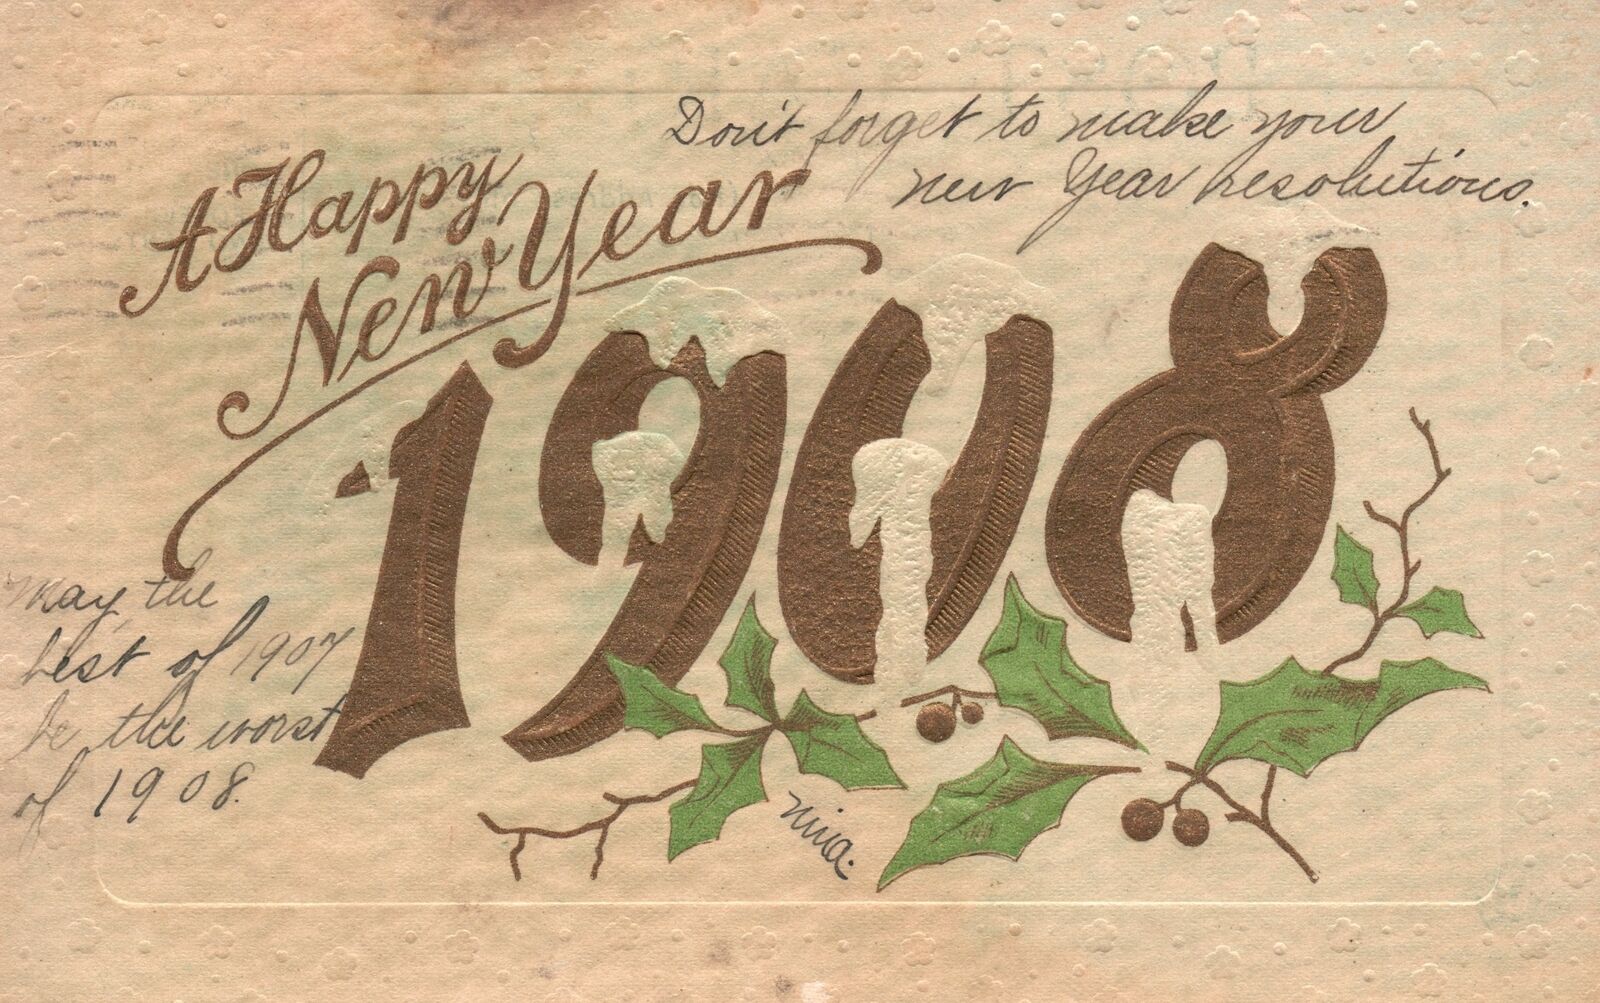 Vintage Postcard 1907 A Happy New Year Calendar Year Date 1908 Snow Greetings